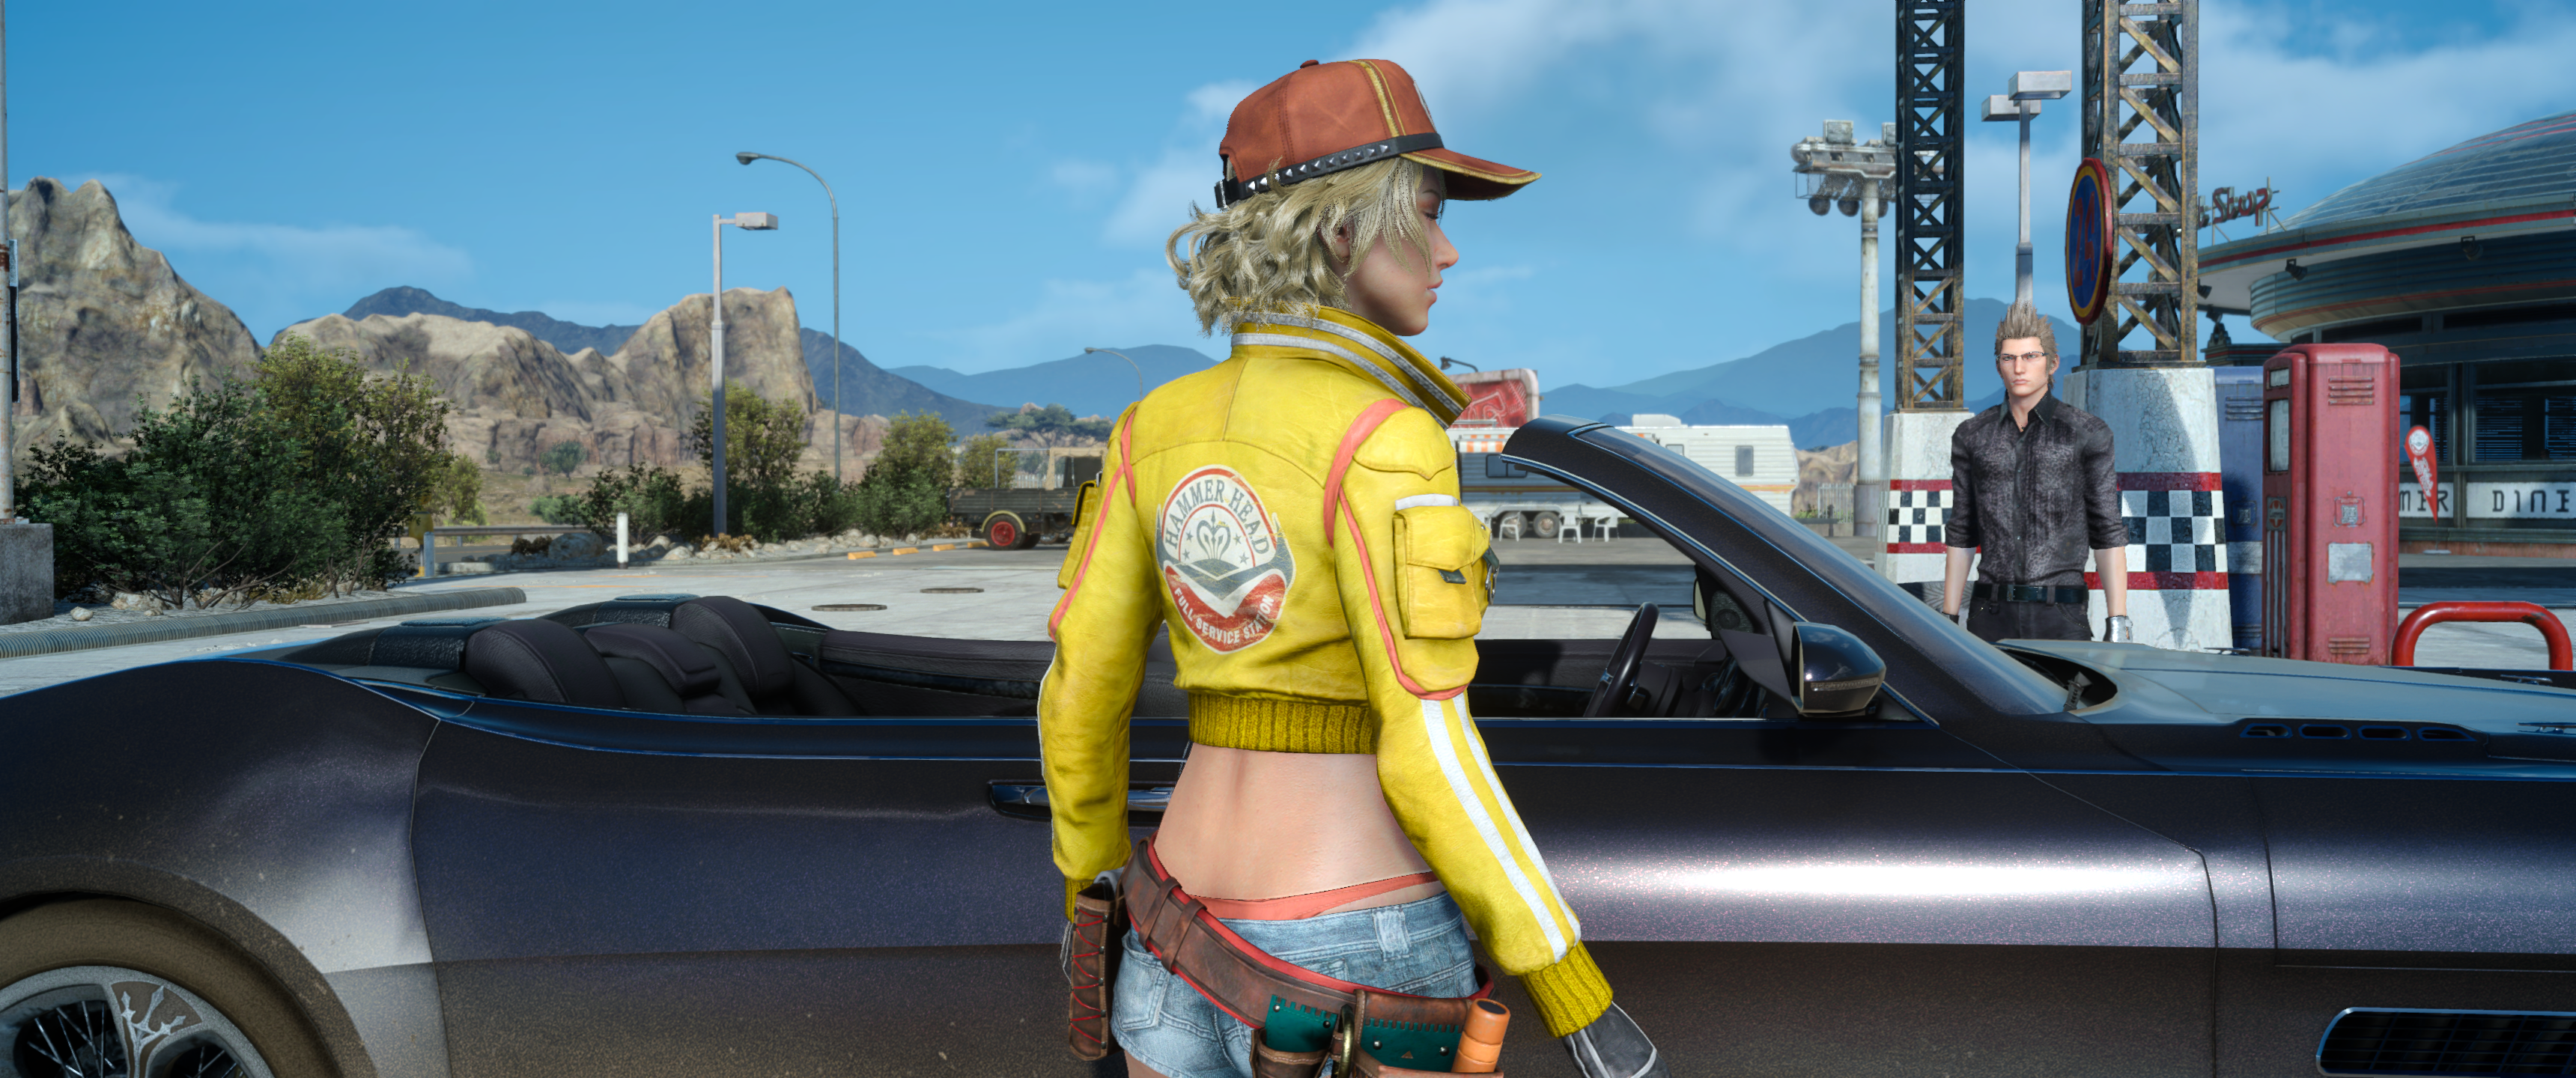 General 3440x1440 Final Fantasy XV Final Fantasy video games Cindy Aurum Ignis video game characters Square Enix